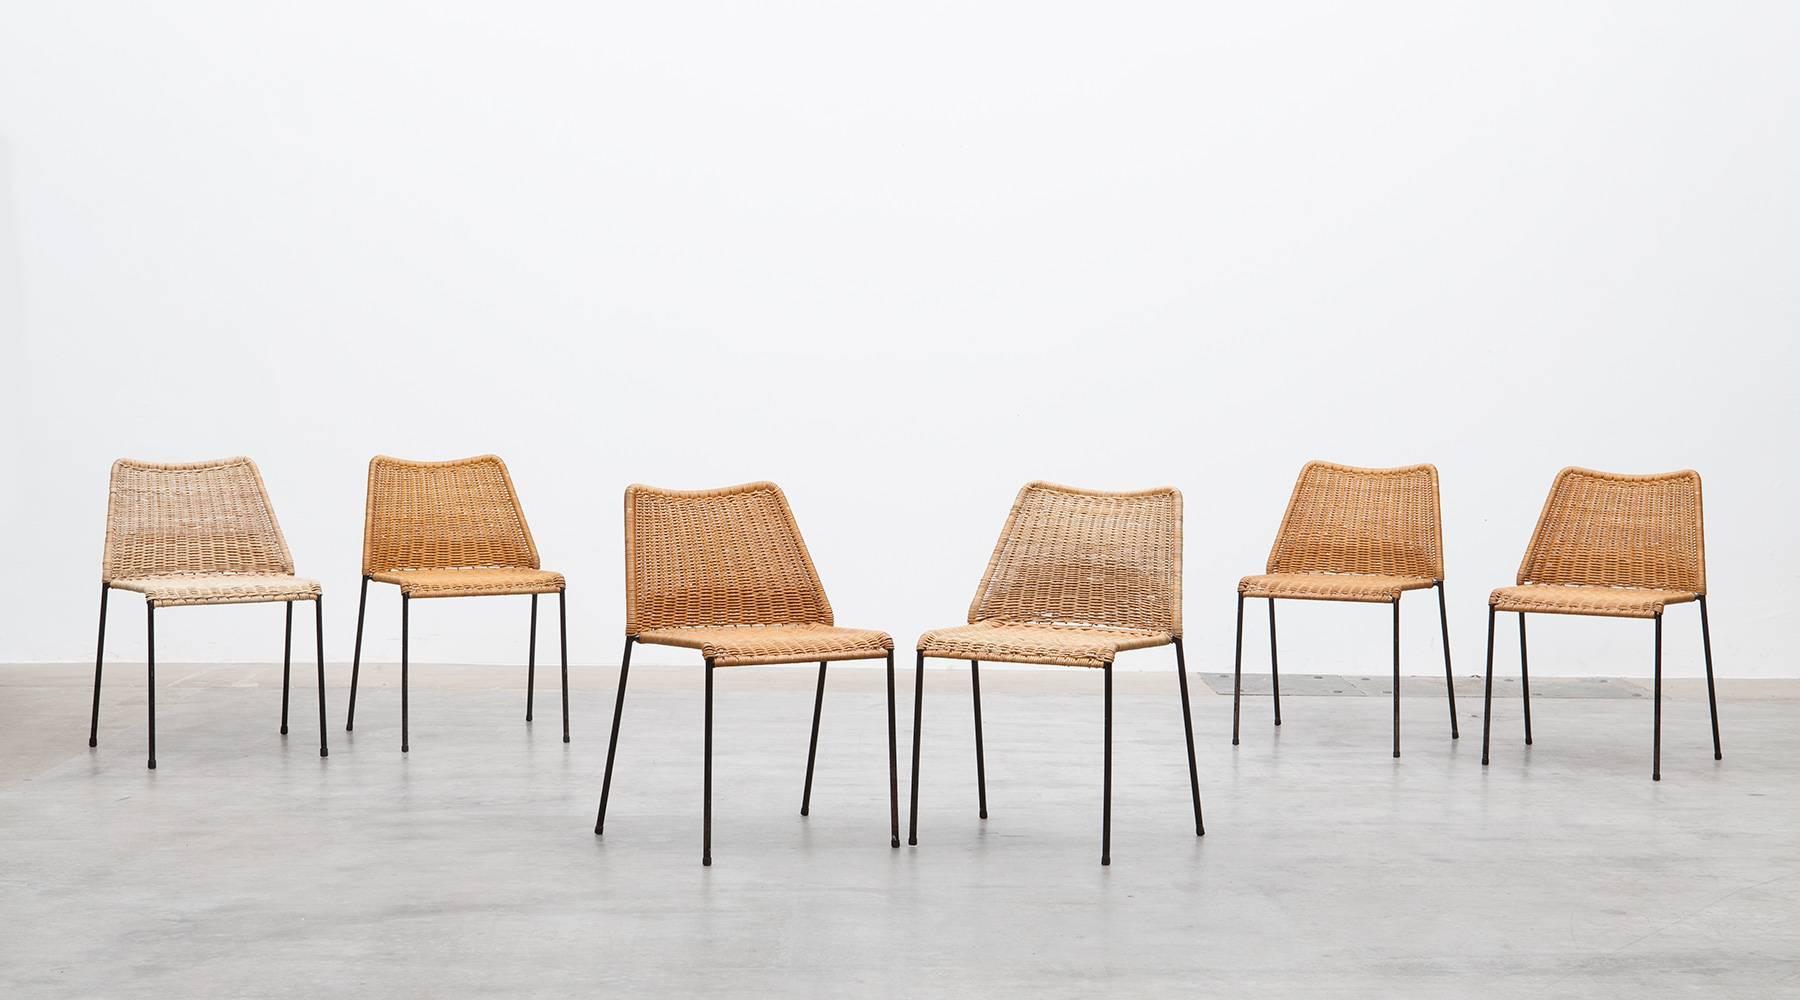 Very rare set of eight chairs in cane on black lacquered metal frame are designed by German architect Herbert Hirche who was a Student of Wassily Kandinsky and Ludwig Mies van der Rohe at the Bauhaus. Manufactured by Wilde+Spieth.